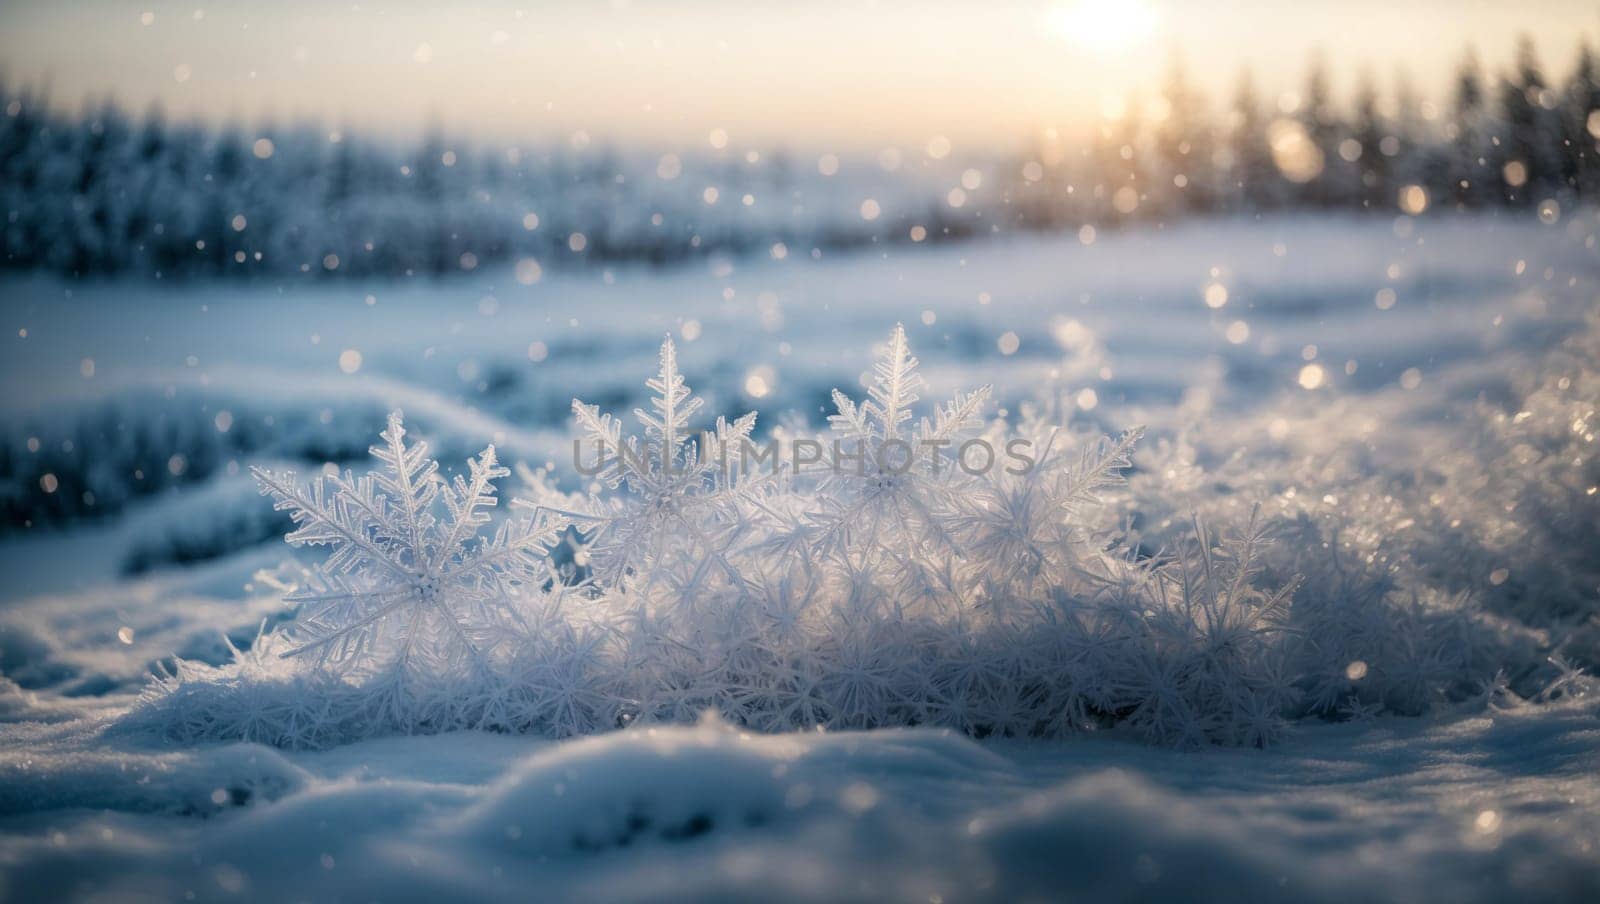 Decorative winter blue background with snowflakes, waves and snow embodies the atmosphere of magic and cold beauty of the winter season. This background embodies the tranquility and purity that are inherent in a winter landscape.